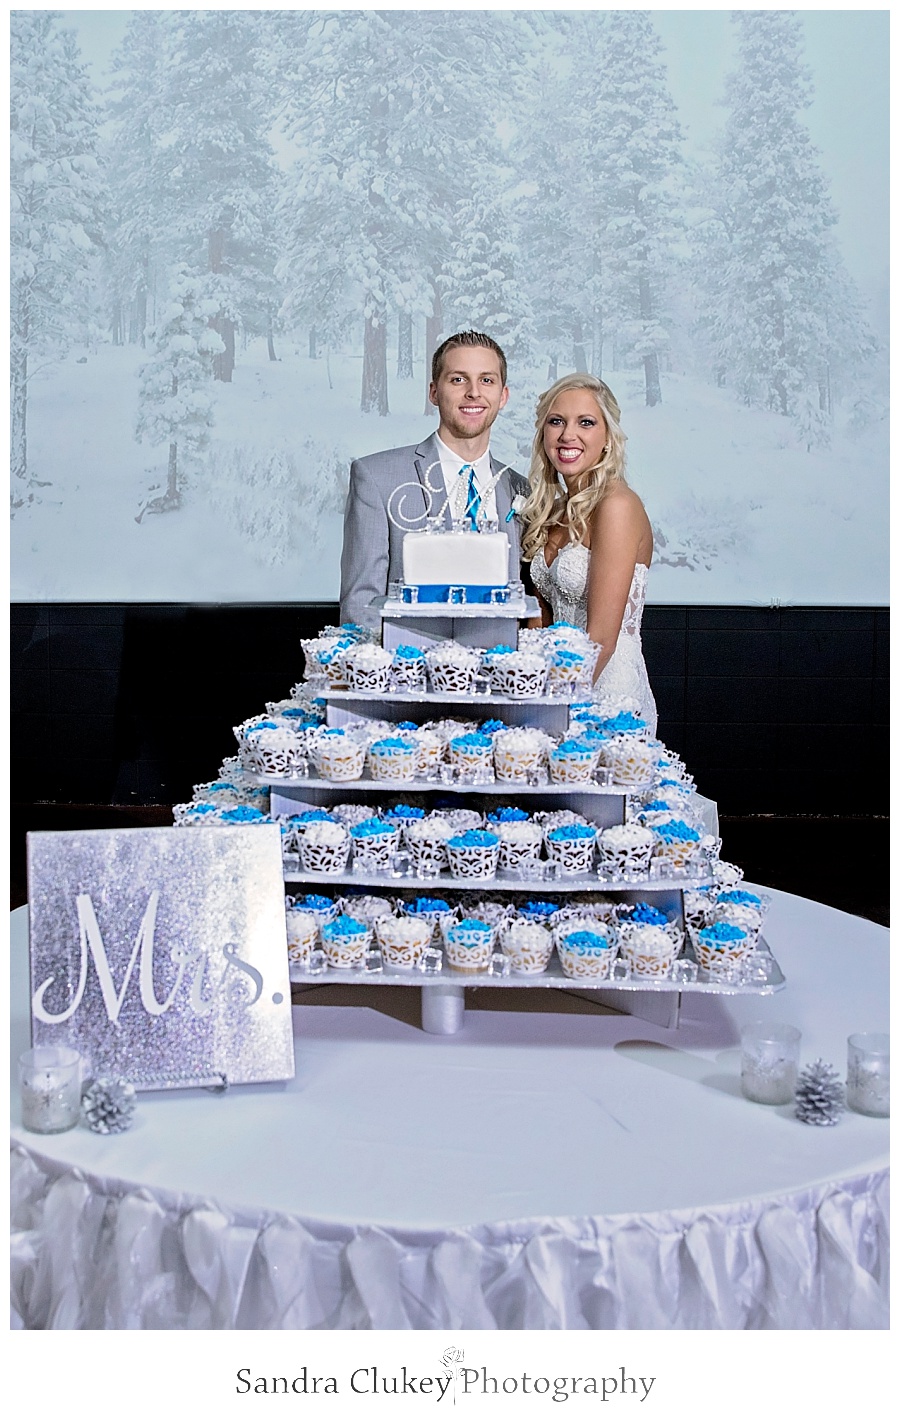 Bride and Groom with wedding cake